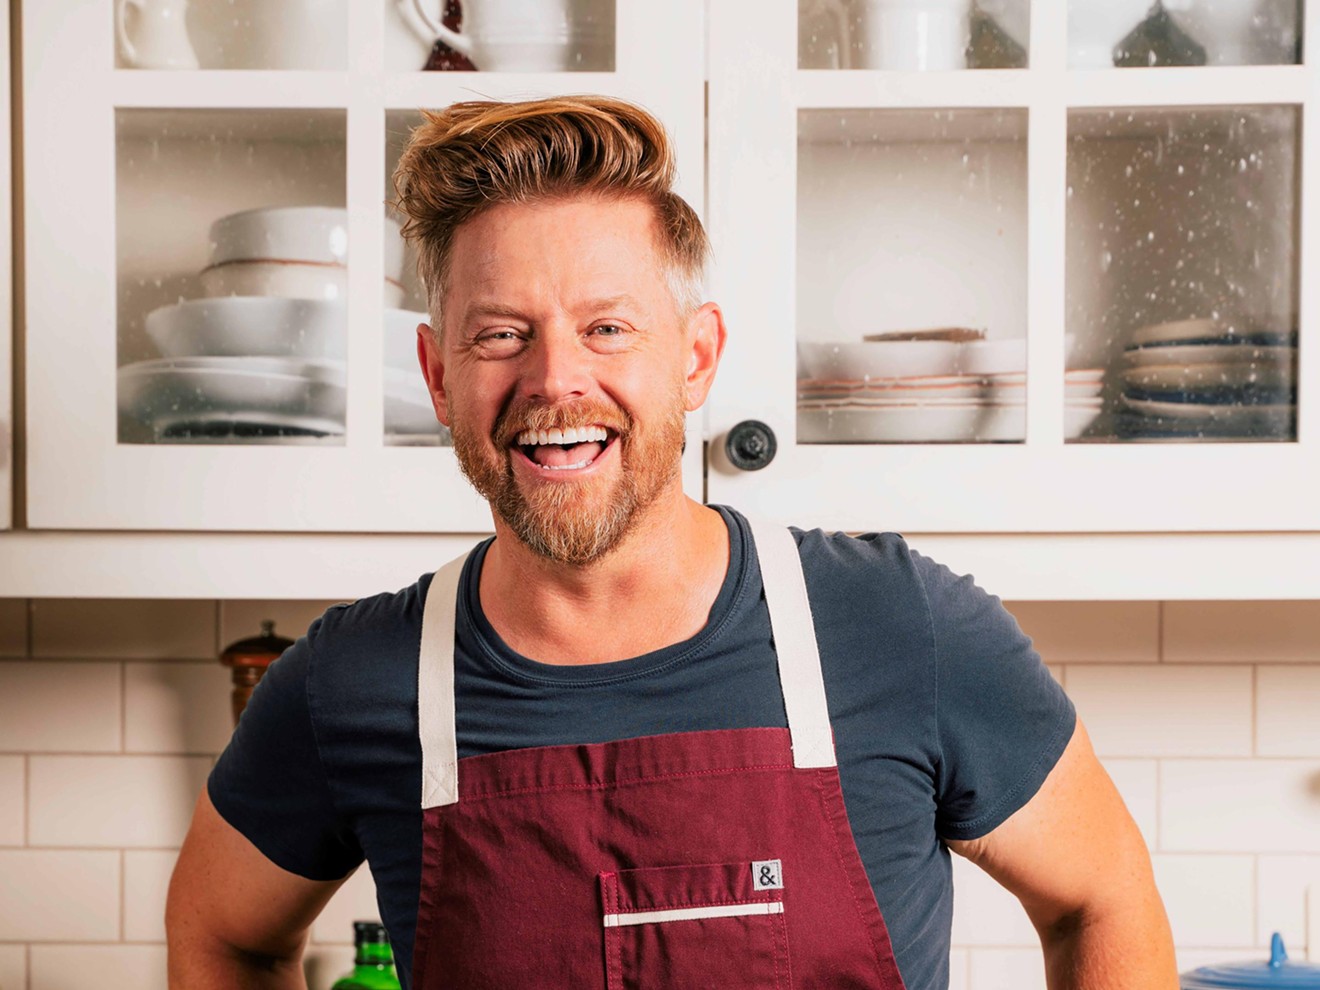 Celebrity chef Richard Blais is set to open six new restaurants in Scottsdale. They will be his first in Arizona.